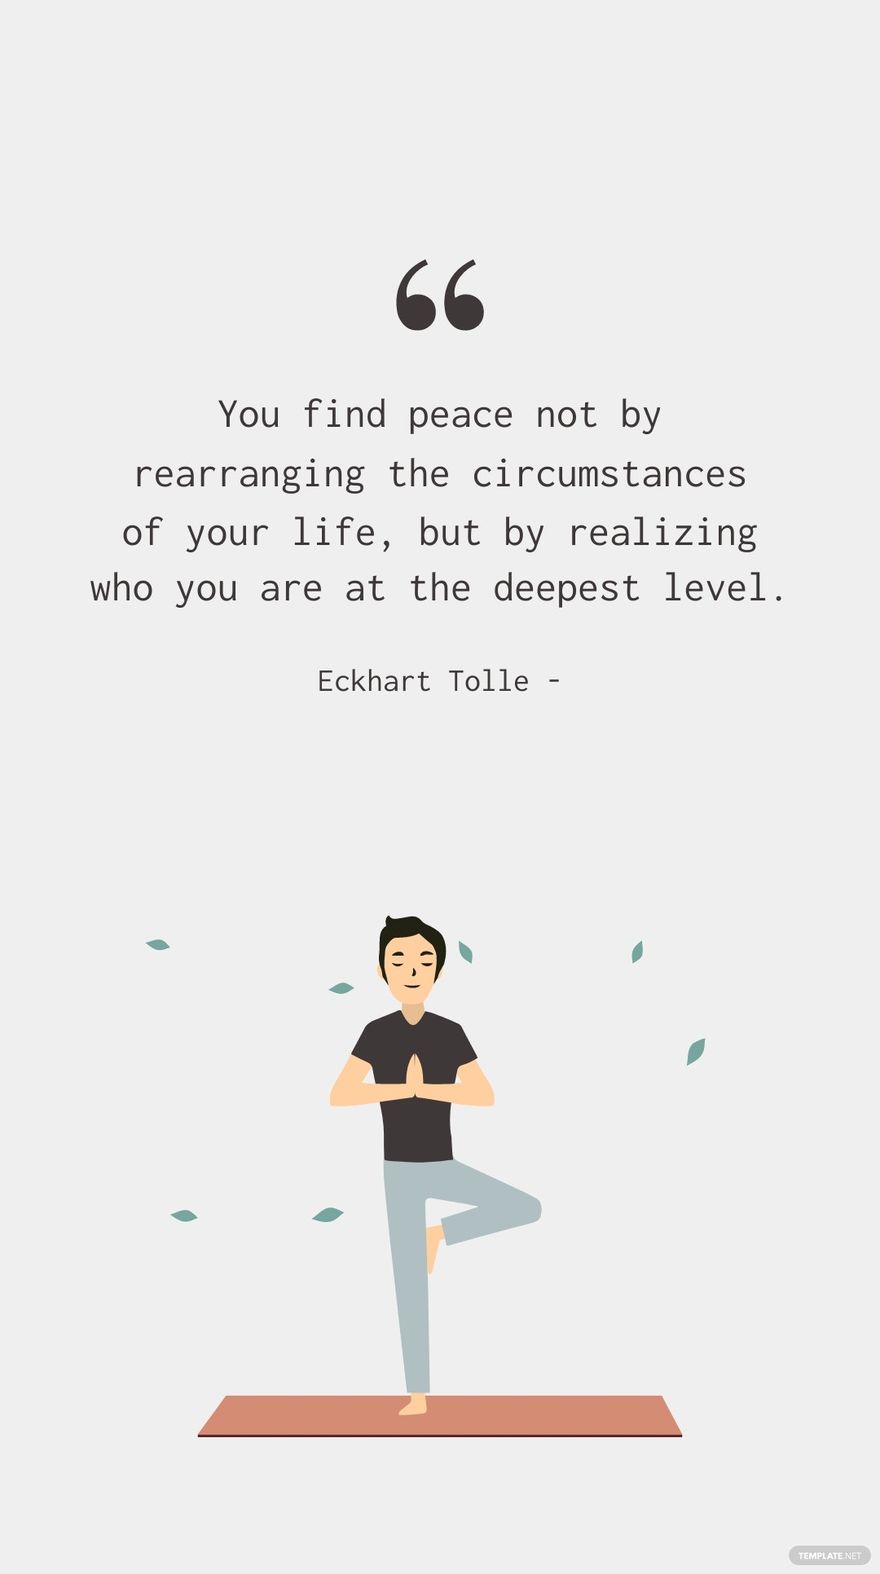 Eckhart Tolle - You find peace not by rearranging the circumstances of your life, but by realizing who you are at the deepest level.